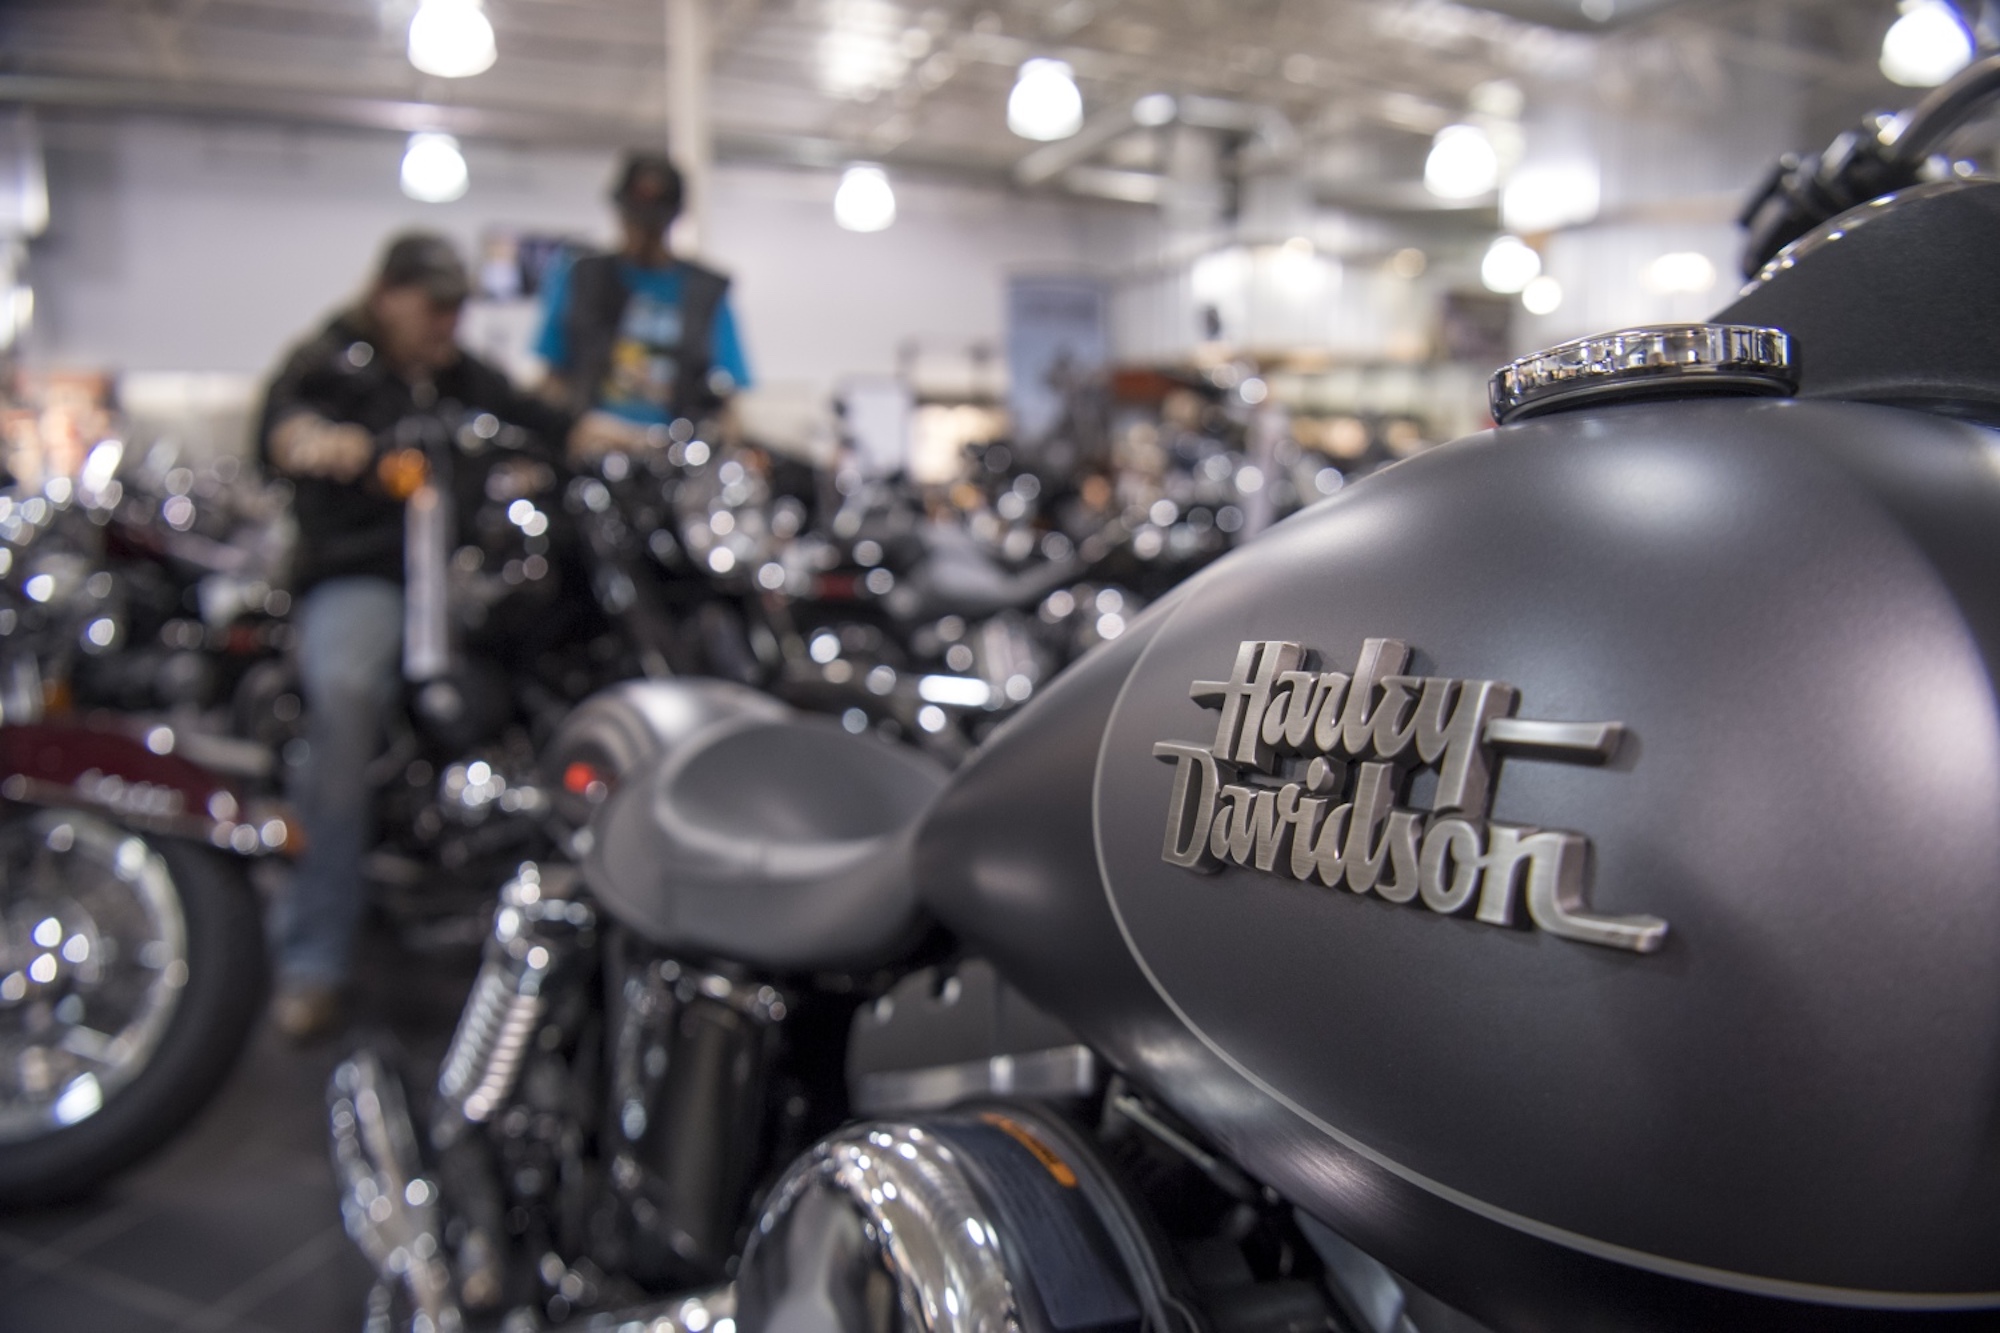 Harley-Davidson halts motorcycle production, shipping for two weeks